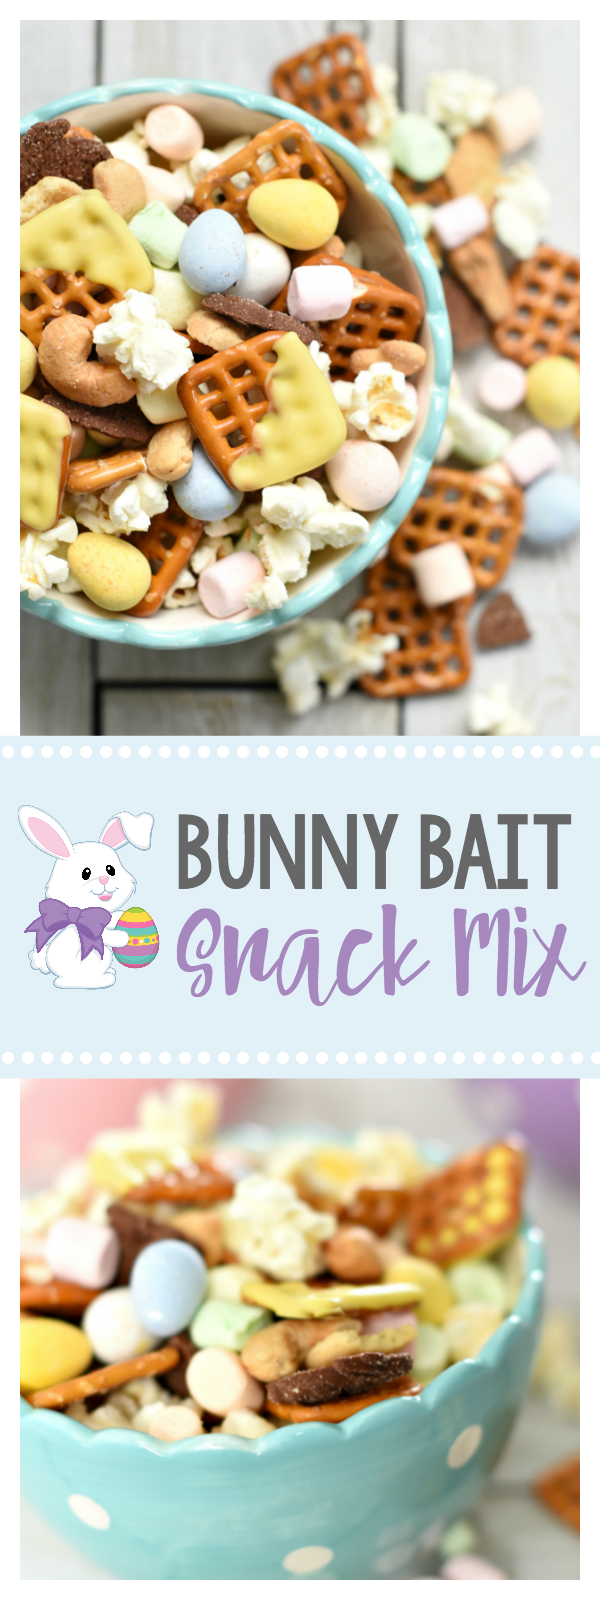 Bunny Bait Snack Mix-This fun Easter treat is great for a party or just a Spring snack. Who doesn't love an Easter snack mix with Cadbury mini eggs in it? #easter #dessert #snackmix #easterrecipes 